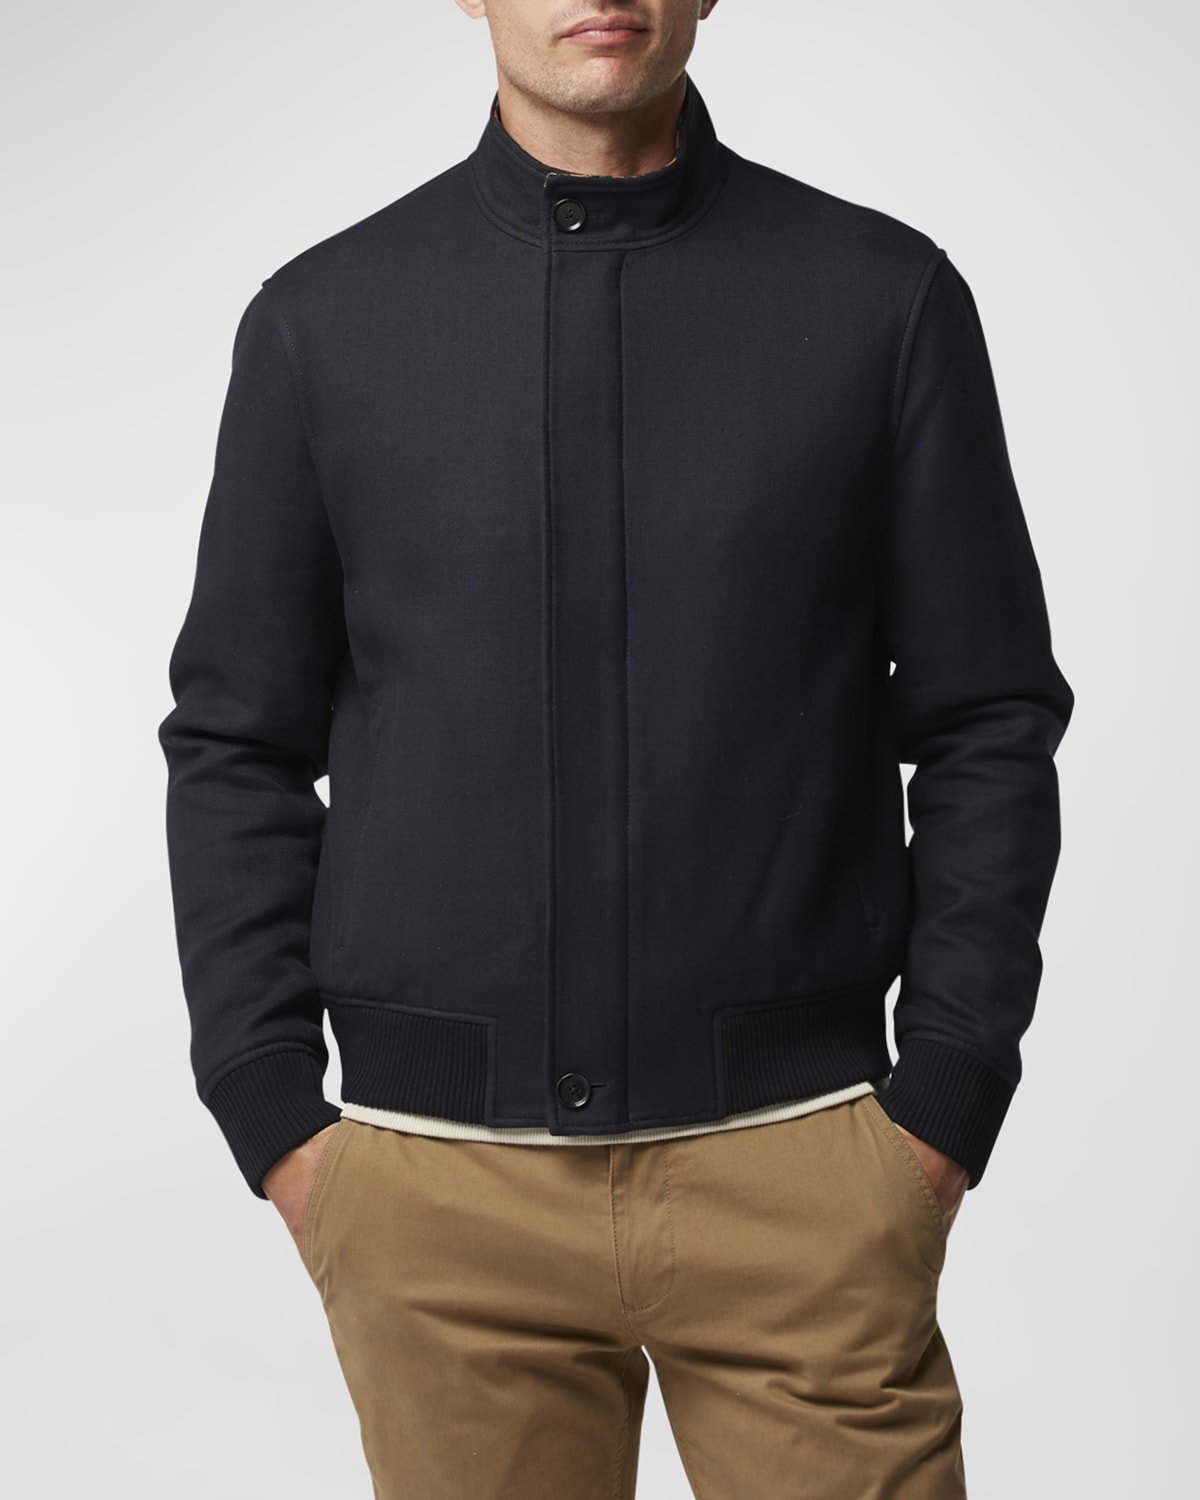 tirsdag Stort univers Lover og forskrifter The Very Warm Men's Fly Weight Coach Jacket | Neiman Marcus